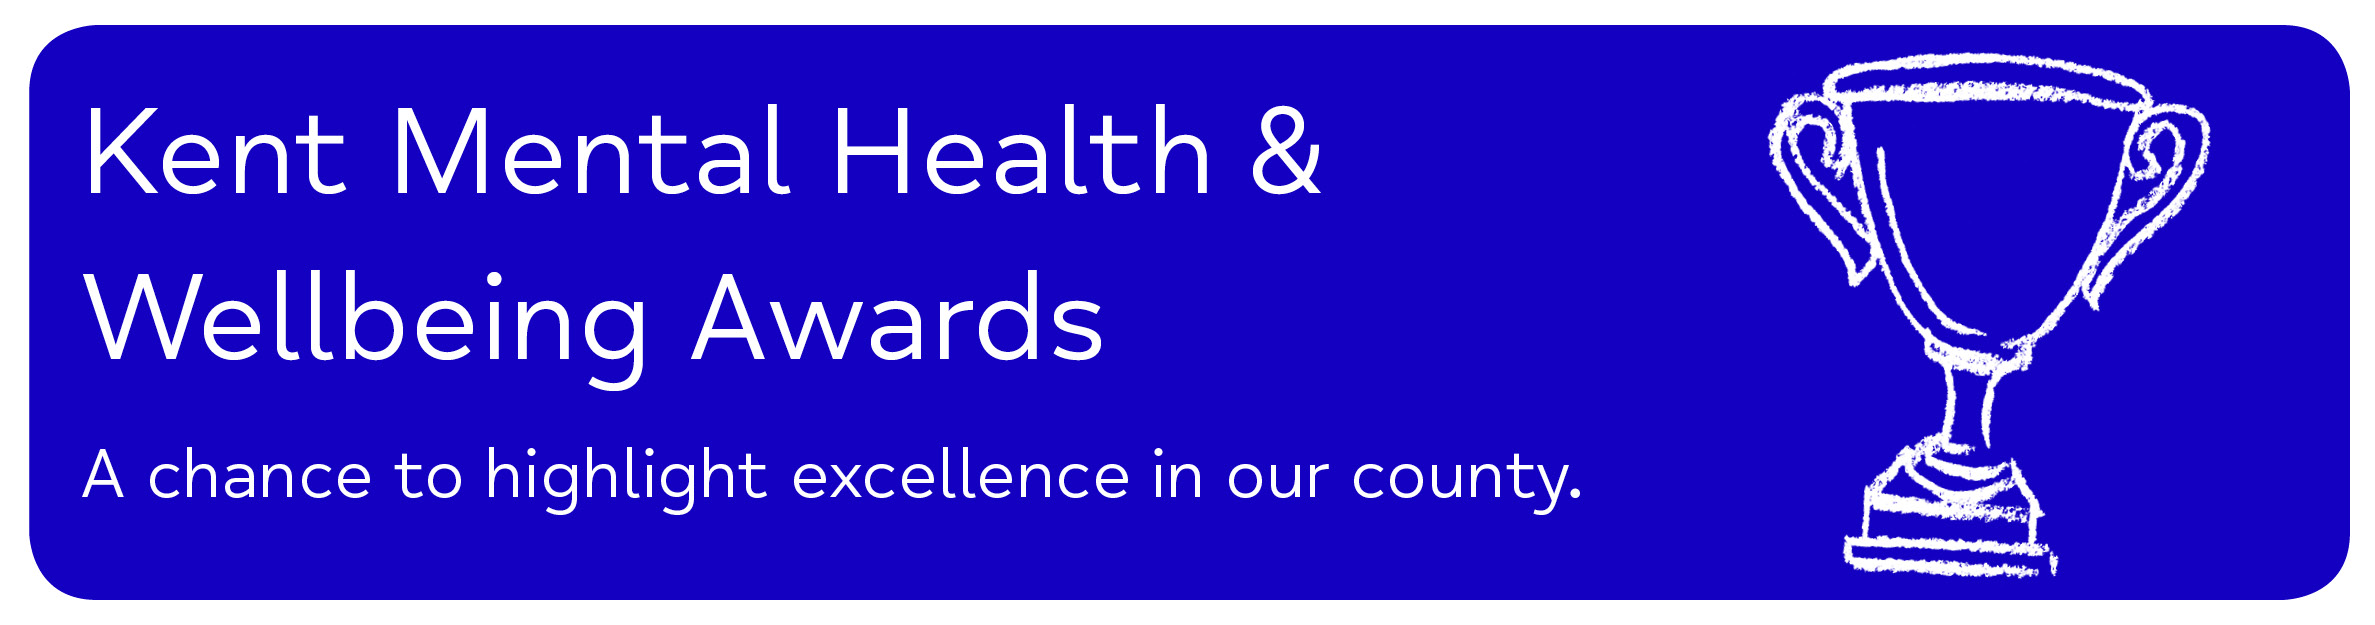 Kent Mental Health & Wellbeing Awards A chance to highlight excellence in our county.